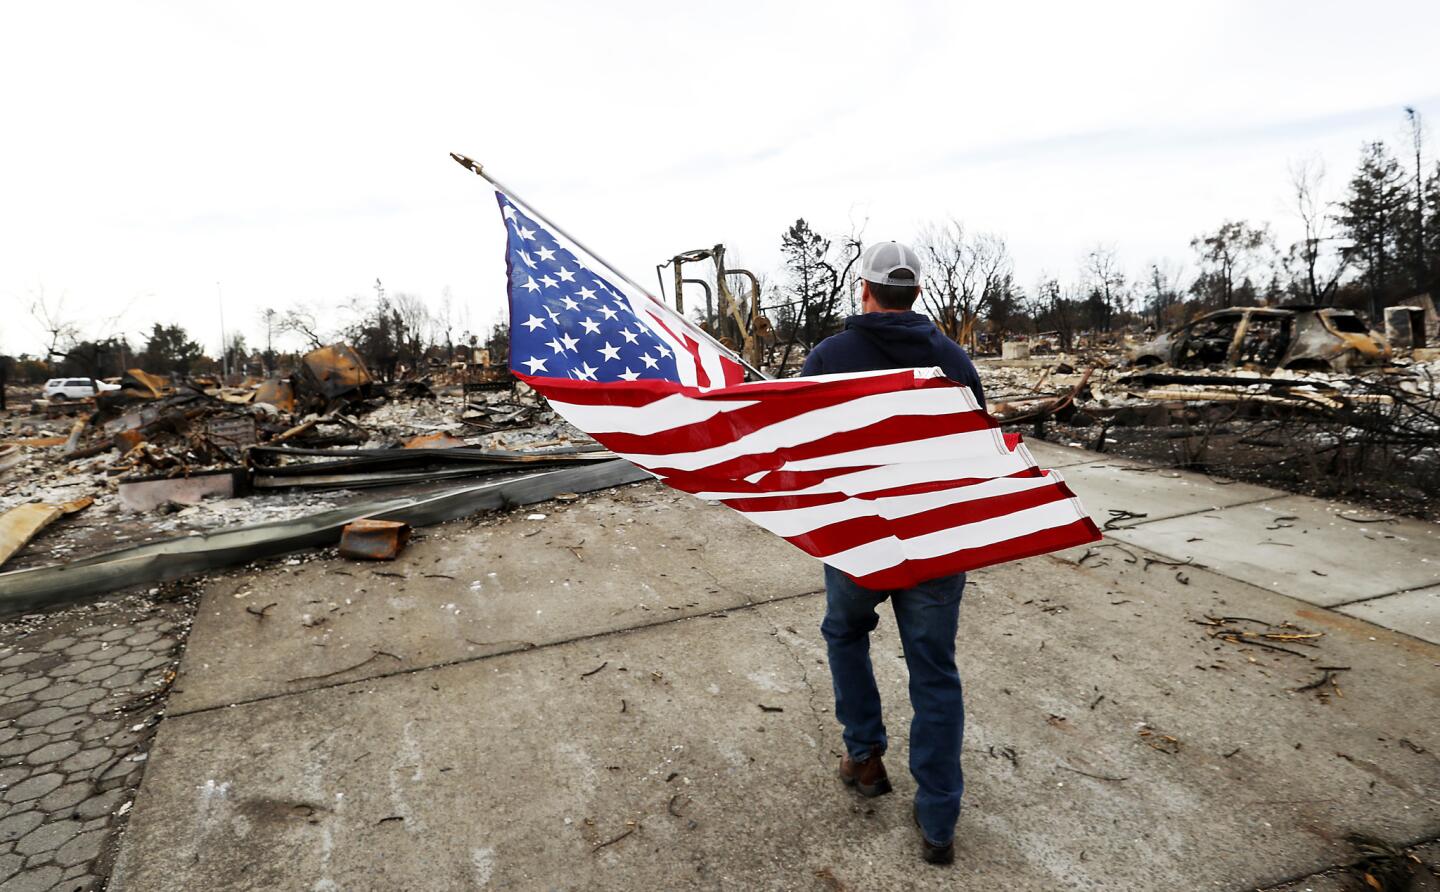 Jason Miller, 45, prepares to plant an American flag on the charred remains of his house as residents of Coffey Park, devastated by the Tubbs fire, return home on Oct. 20.